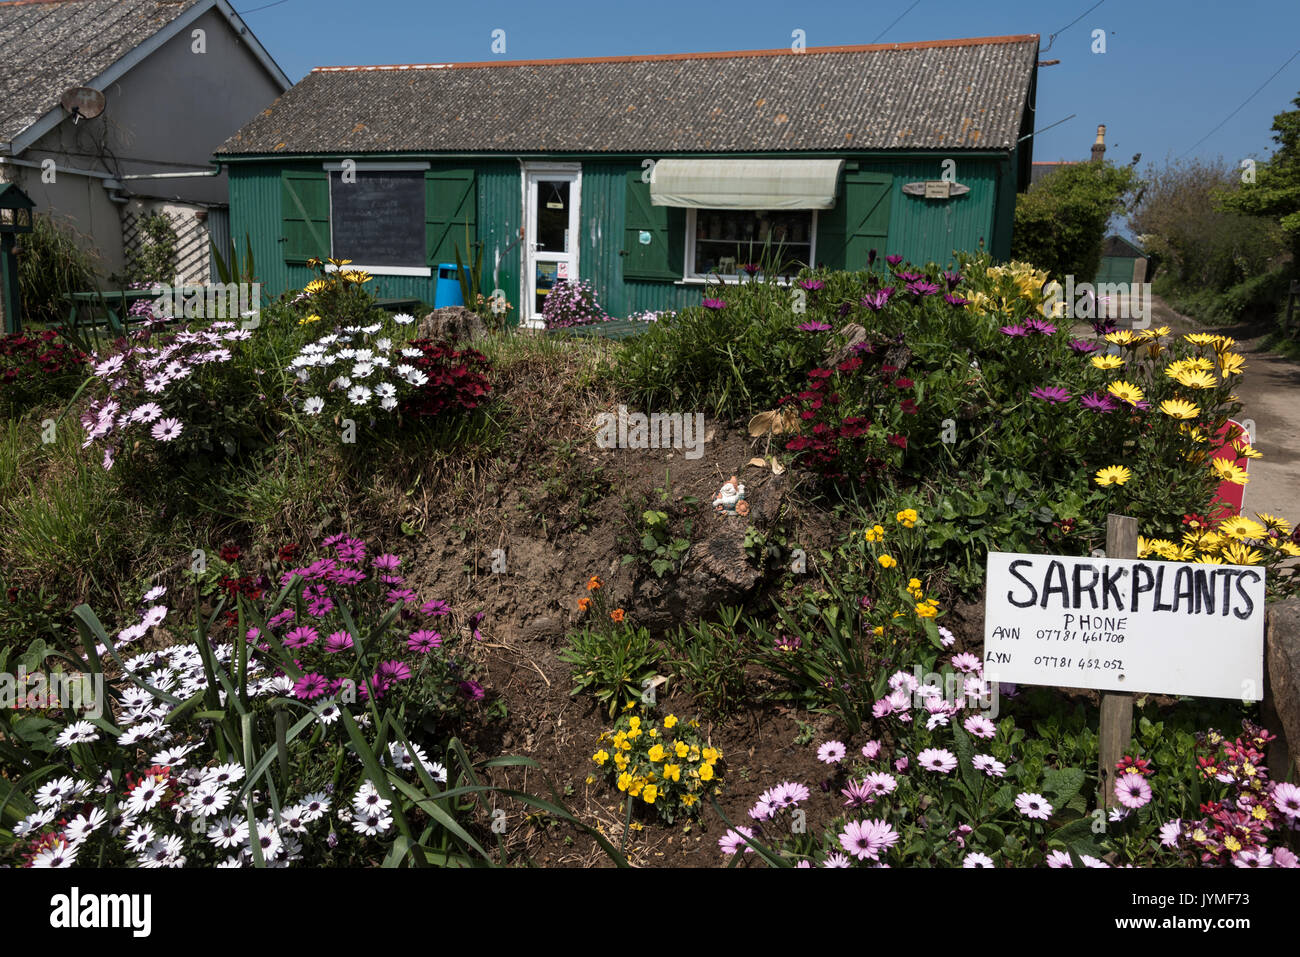 A small village store on the Island of Sark in the Channel Islands, Britain Stock Photo